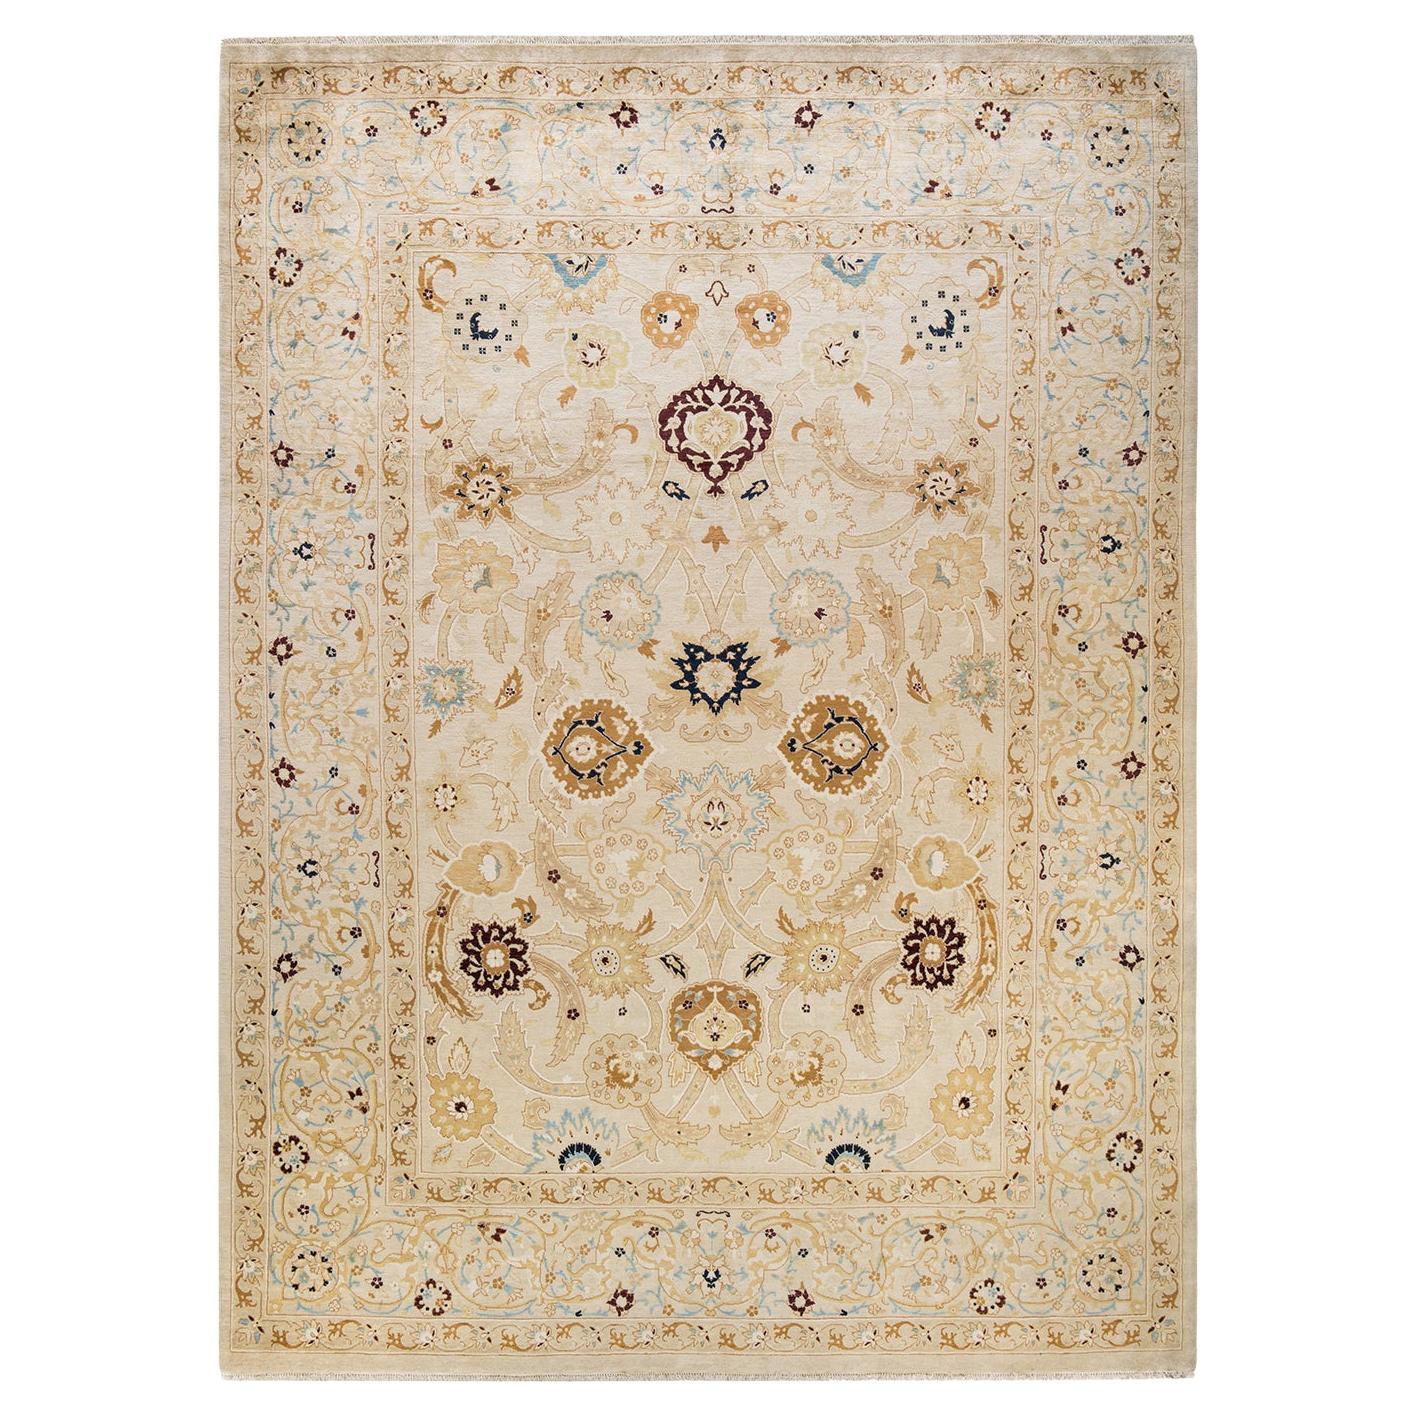 Contemporary Eclectic Hand Knotted Wool Ivory Area Rug